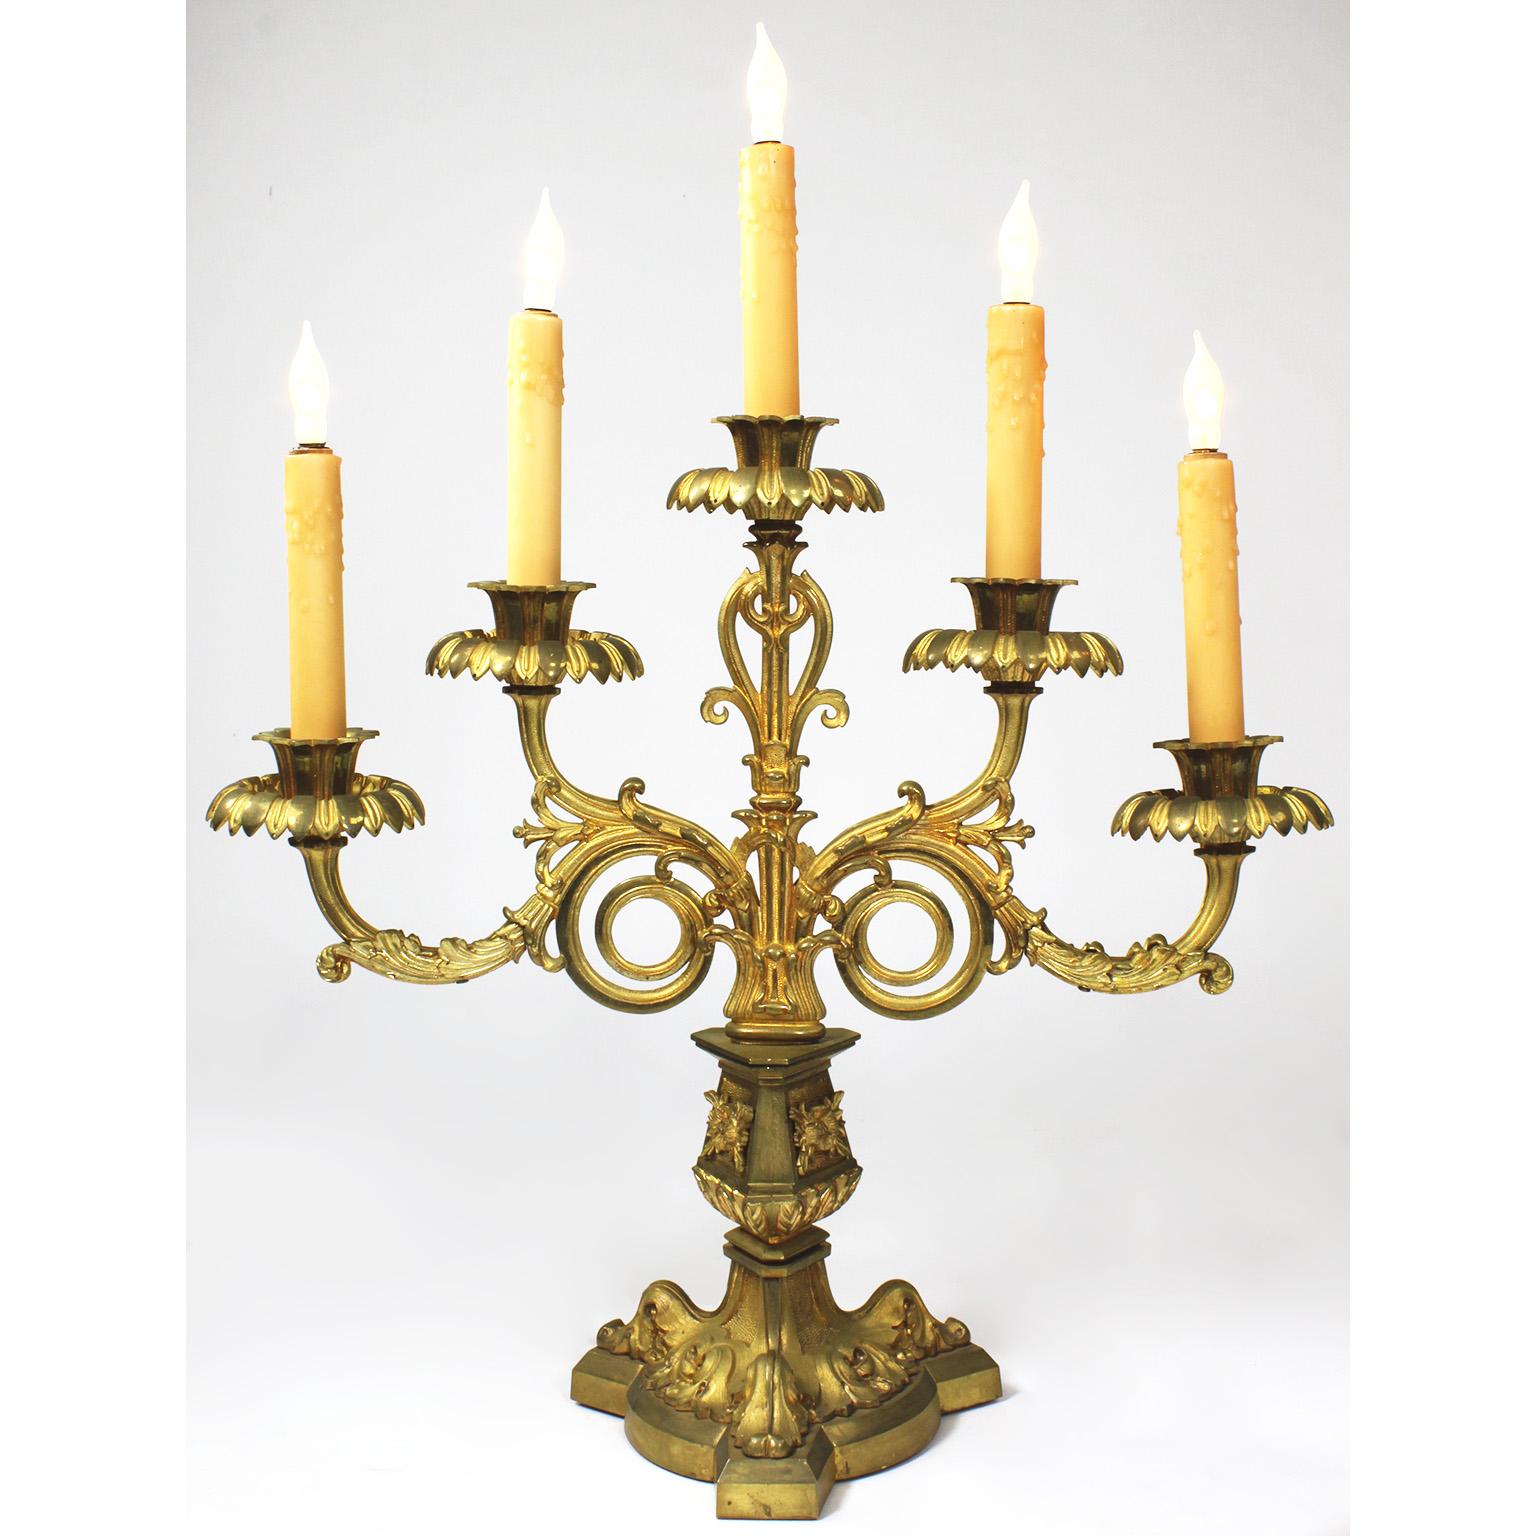 A fine pair of French 19th century Gothic-Revival neoclassical style five-light gilt-bronze candelabra. The finely chased gilt-bronze tripod-leaf base, surmounted with floral rosettes supporting five scrolled candelabrum arms. (Now electrified).